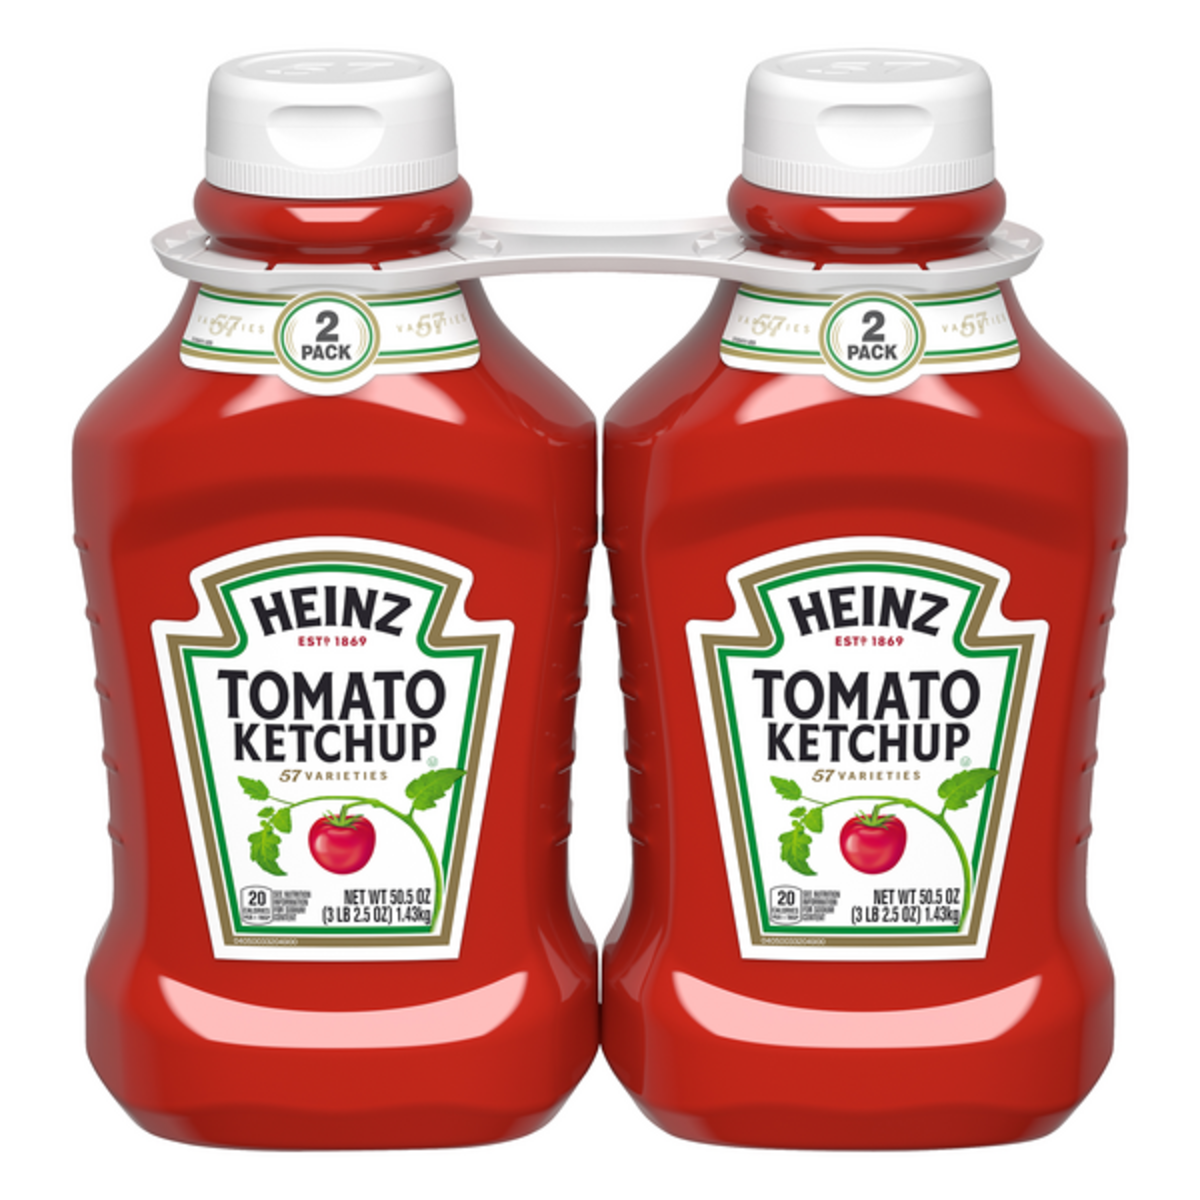 In 1975, a 26-ounce bottle of Heinz ketchup cost 59 cents.